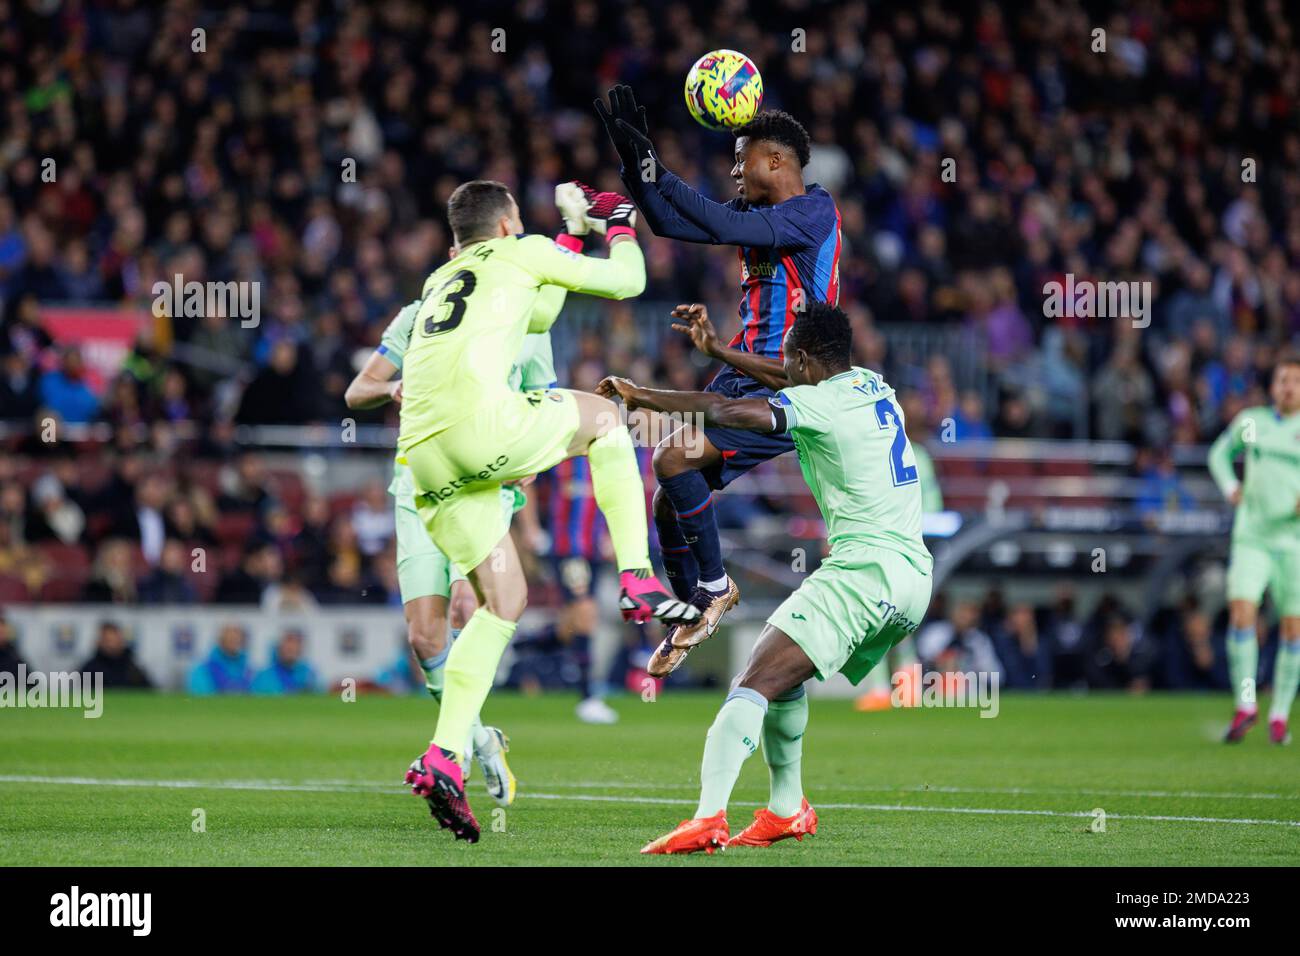 Barcelona, Spain. 22th Jan, 2023. Ansu Fati in action during the LaLiga match between FC Barcelona and Getafe CF at the Spotify Camp Nou Stadium in Barcelona, Spain. Credit: Christian Bertrand/Alamy Live News Stock Photo